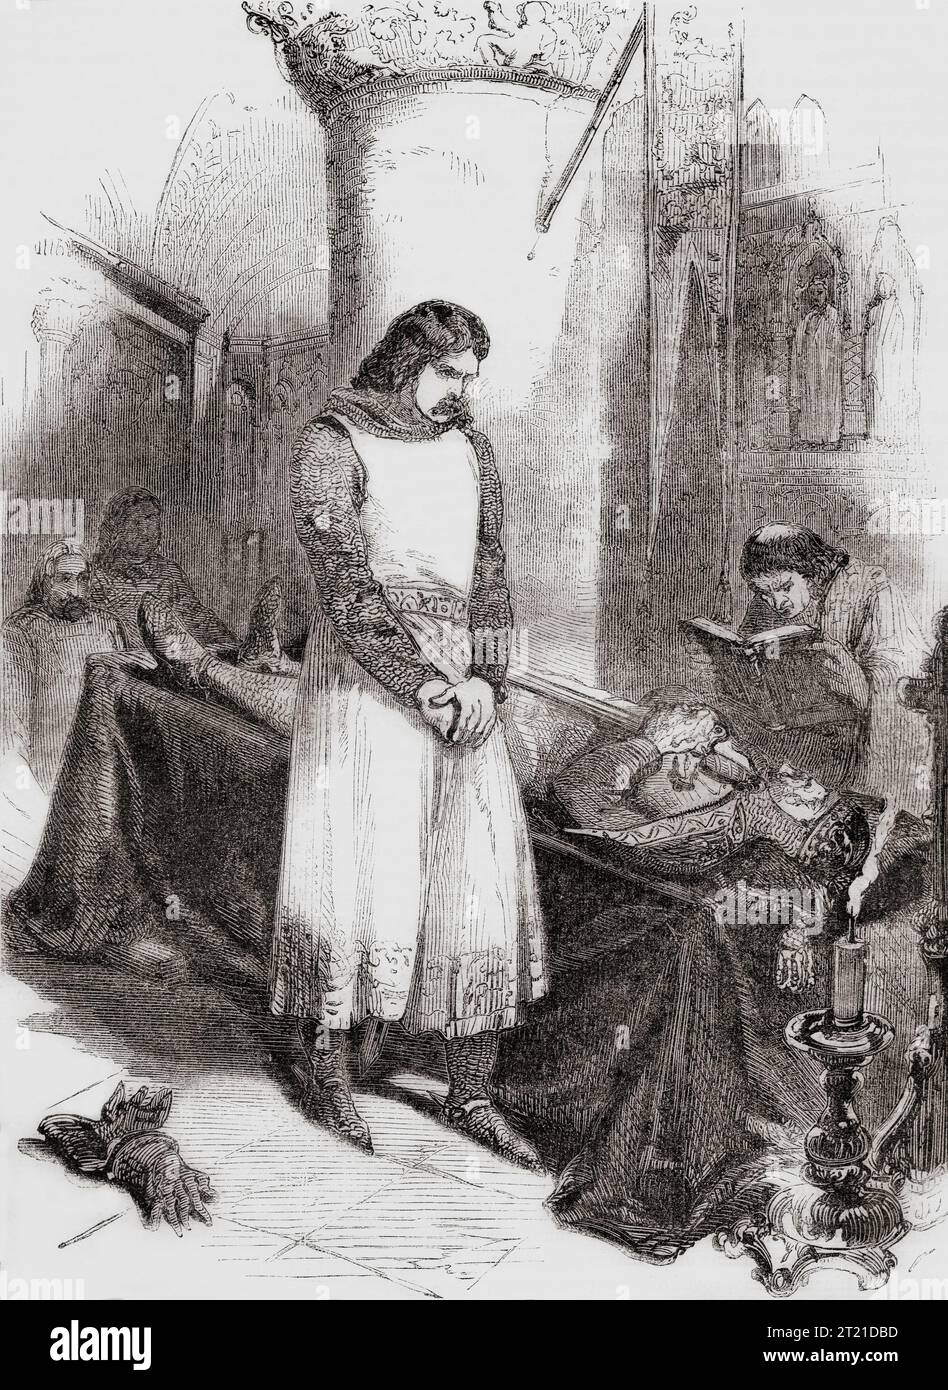 Richard the Lionheart beside the dead body of his father Henry II of England, 1189.  Richard I, 1157 – 1199, aka Richard the Lionheart and Richard Coeur de Lion. King of England.  From Cassell's Illustrated History of England, published 1857. Stock Photo